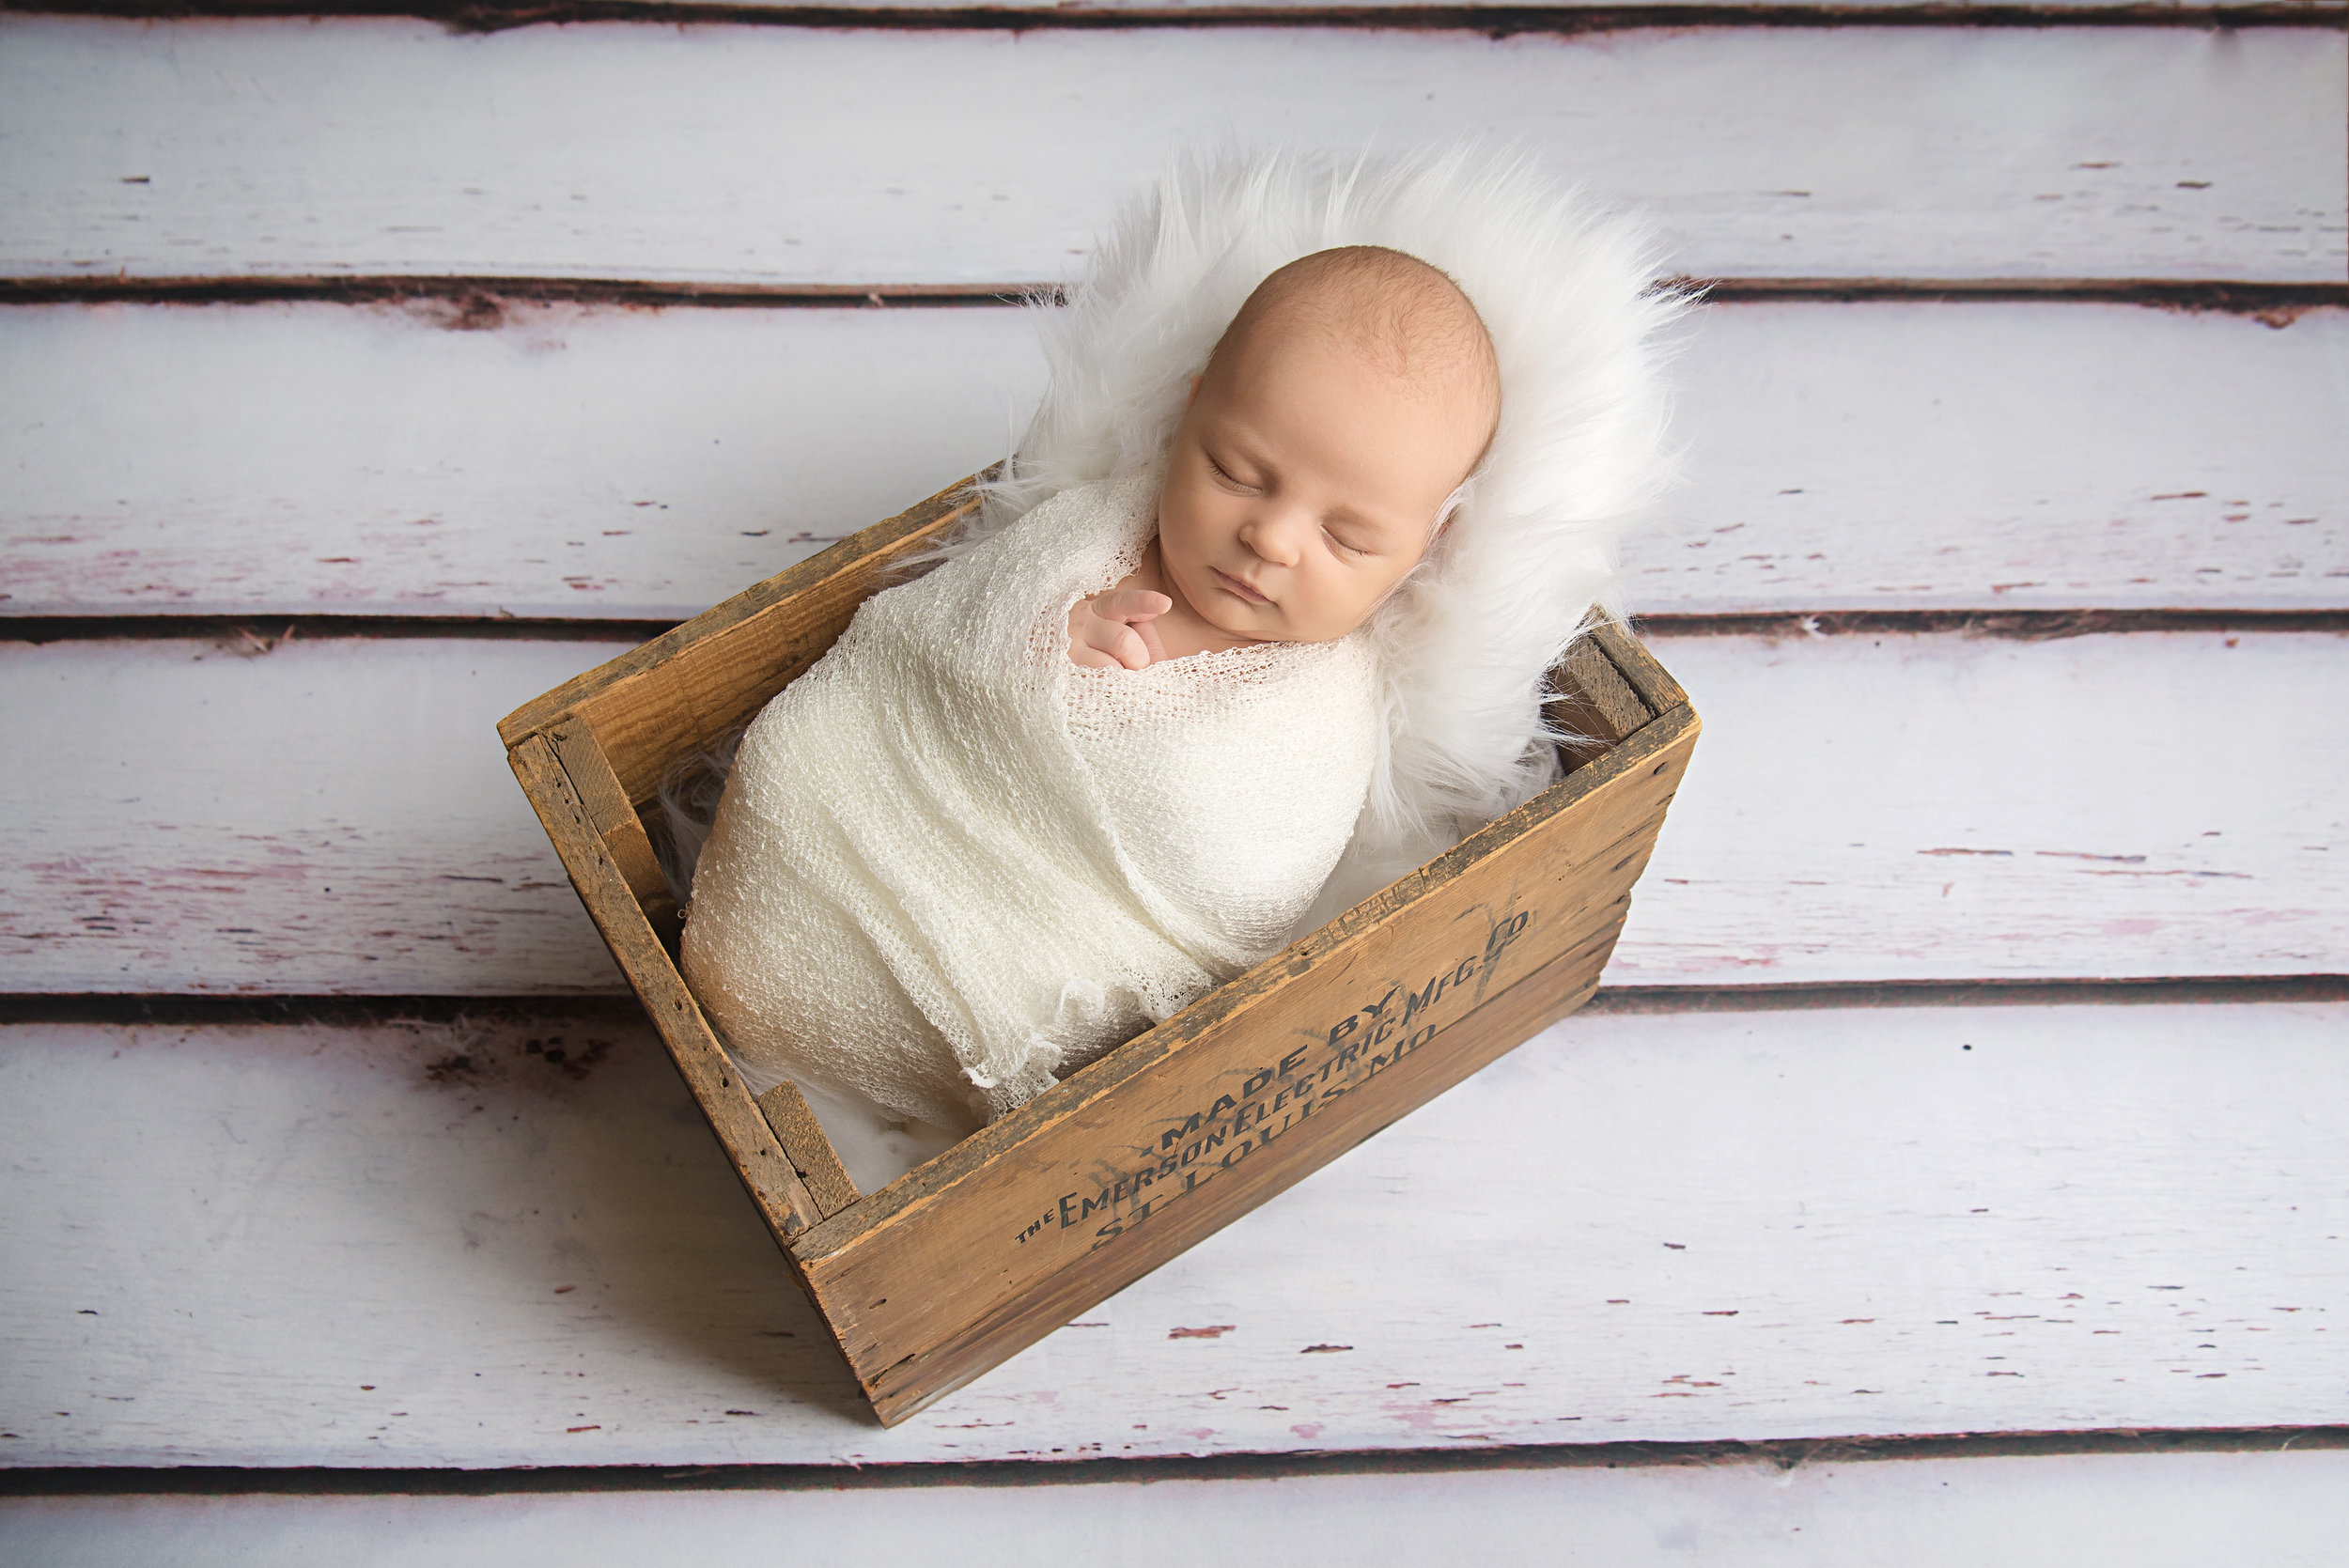 st-louis-newborn-photographer-baby-boy-wrapped-in-white-in-st-louis-emerson-electric-box.jpg